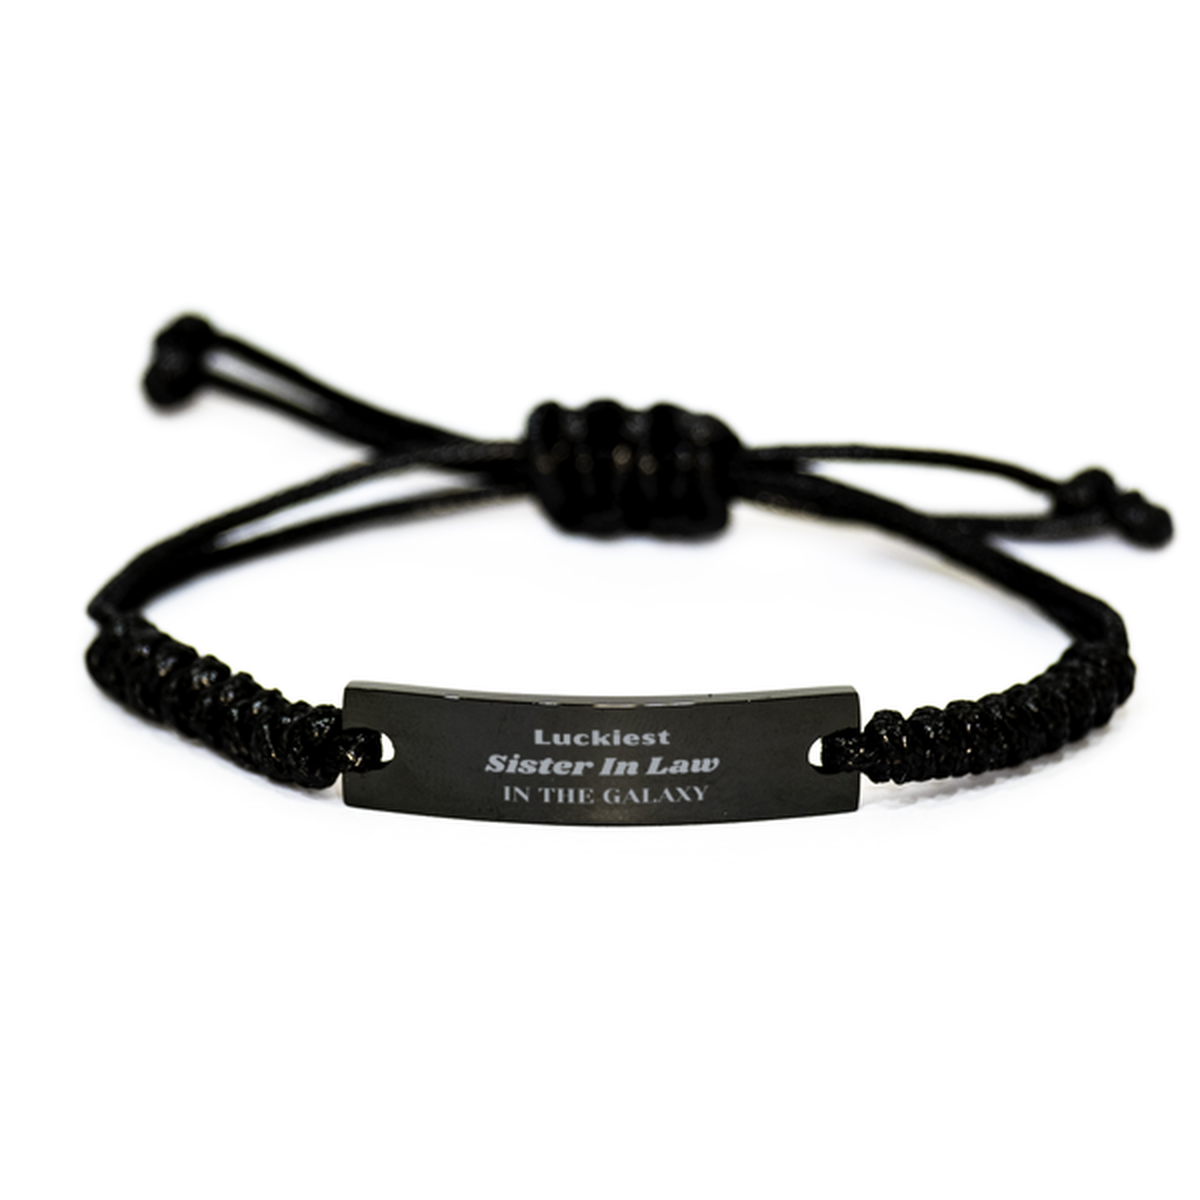 Luckiest Sister In Law in the Galaxy, To My Sister In Law Engraved Gifts, Christmas Sister In Law Black Rope Bracelet Gifts, X-mas Birthday Unique Gifts For Sister In Law Men Women